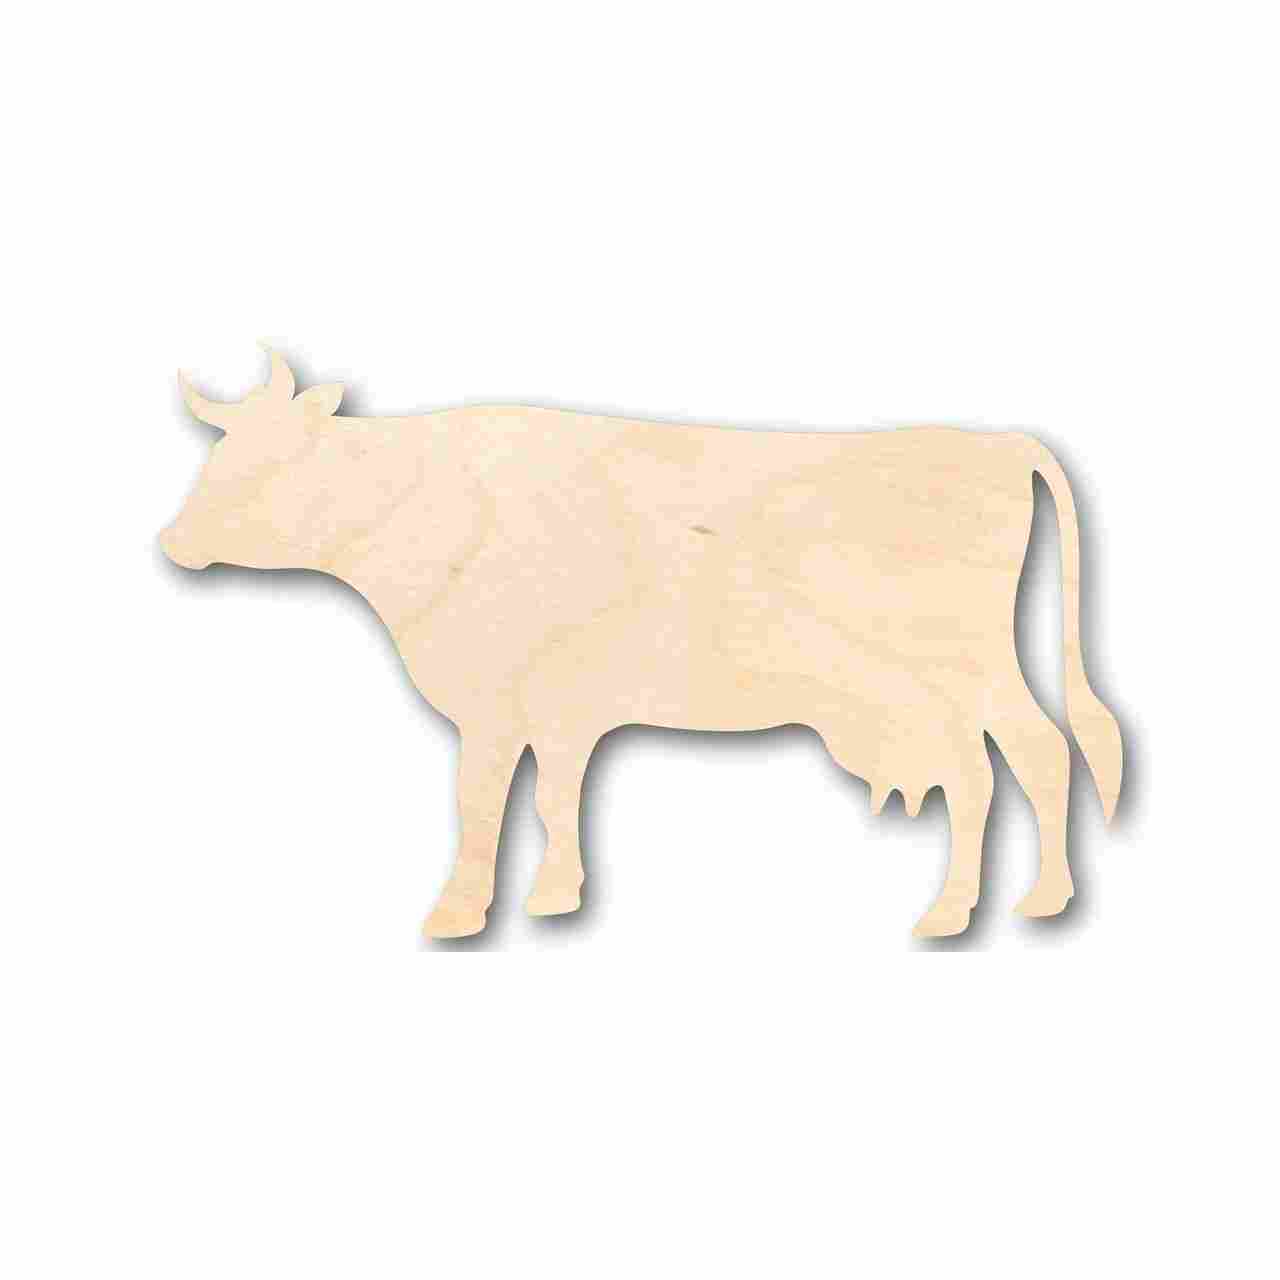 Unfinished Wooden Cow Shape - Farm Animal - Craft - up to 24